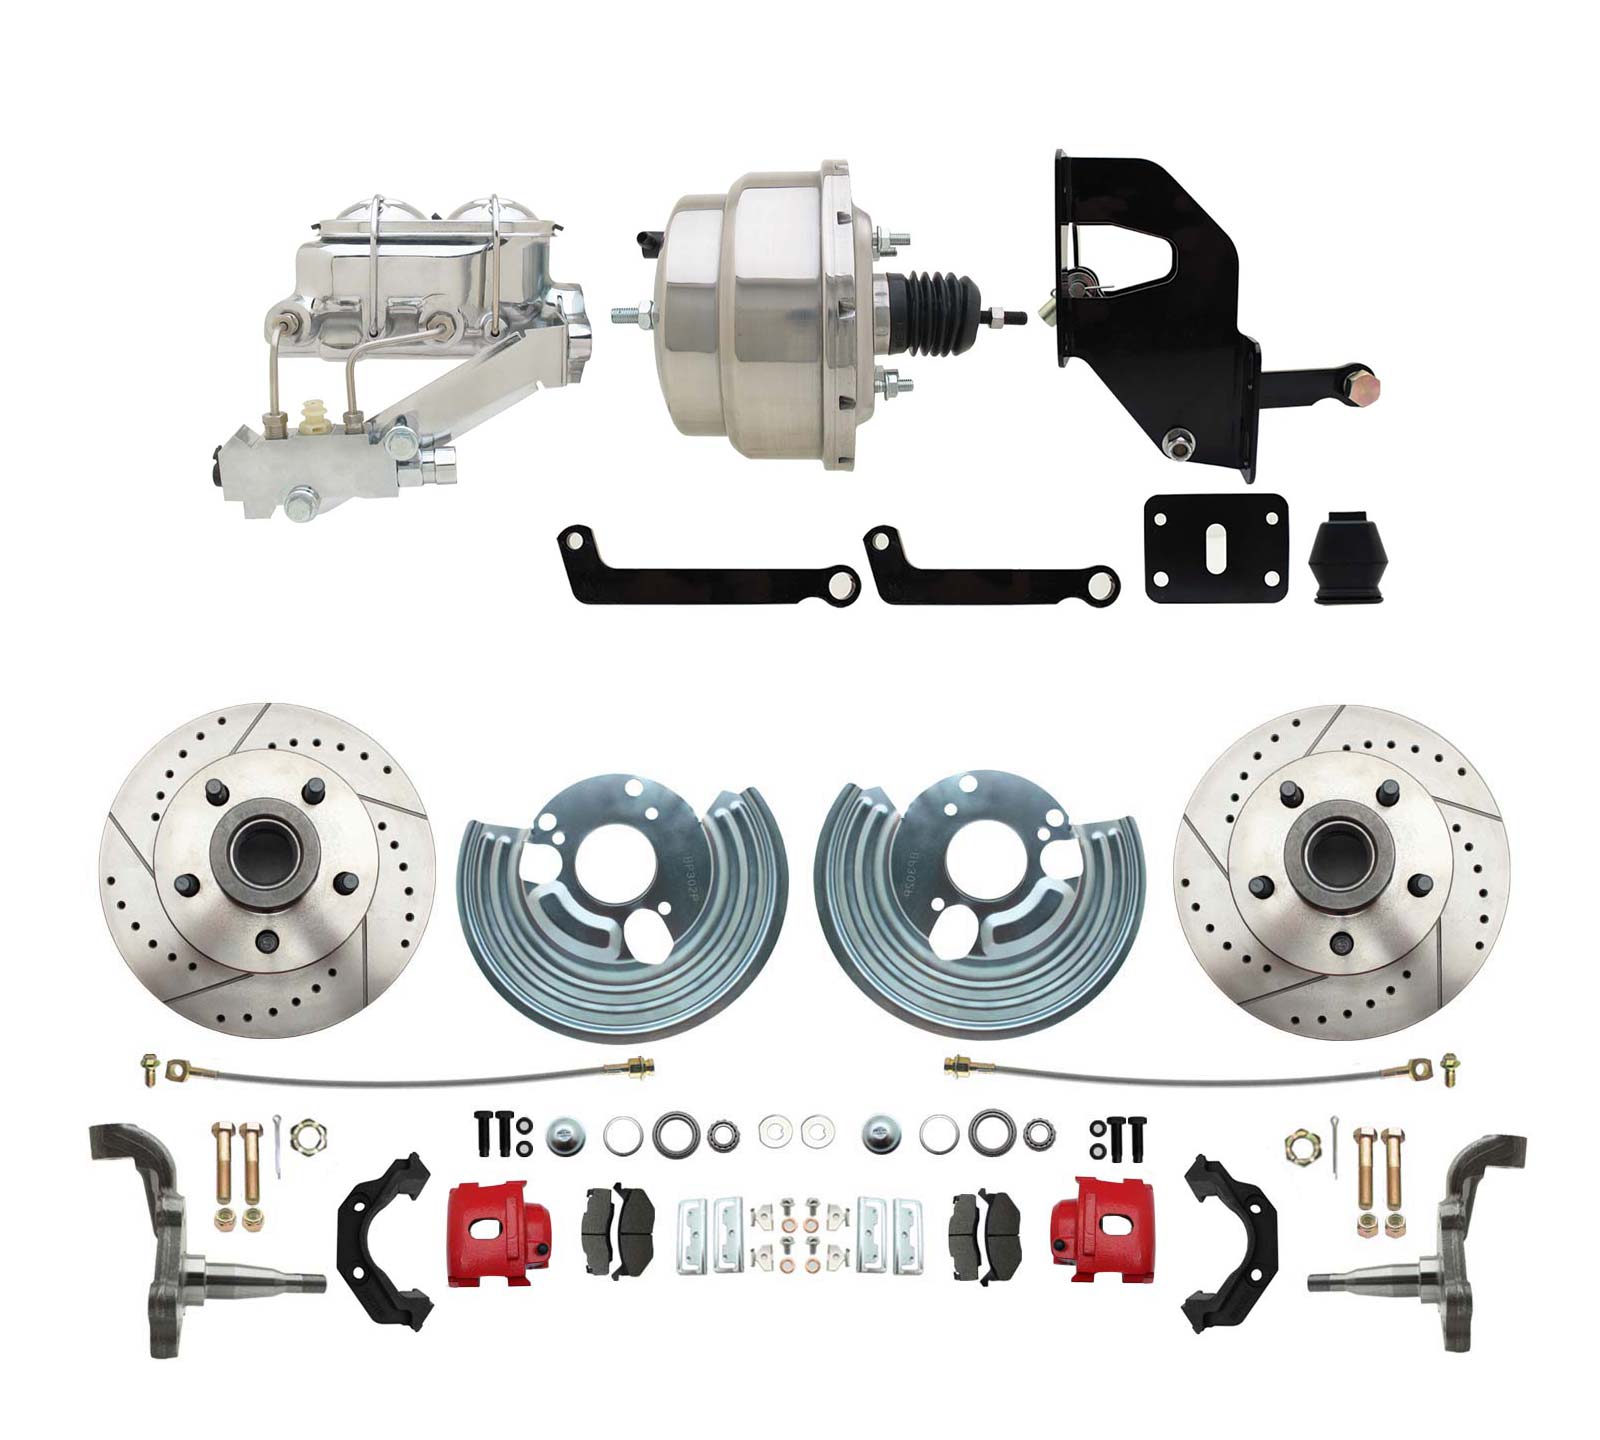 1962-72 Mopar B&E Body  Front Disc Brake Conversion Kit W/ Drilled & Slotted Rotors & Powder Coated Red Calipers ( Charger, Challenger, Coronet) W/ 8 Dual Chrome Booster Conversion Kit W/ Dual Bail Chrome Master Cylinder & Valve